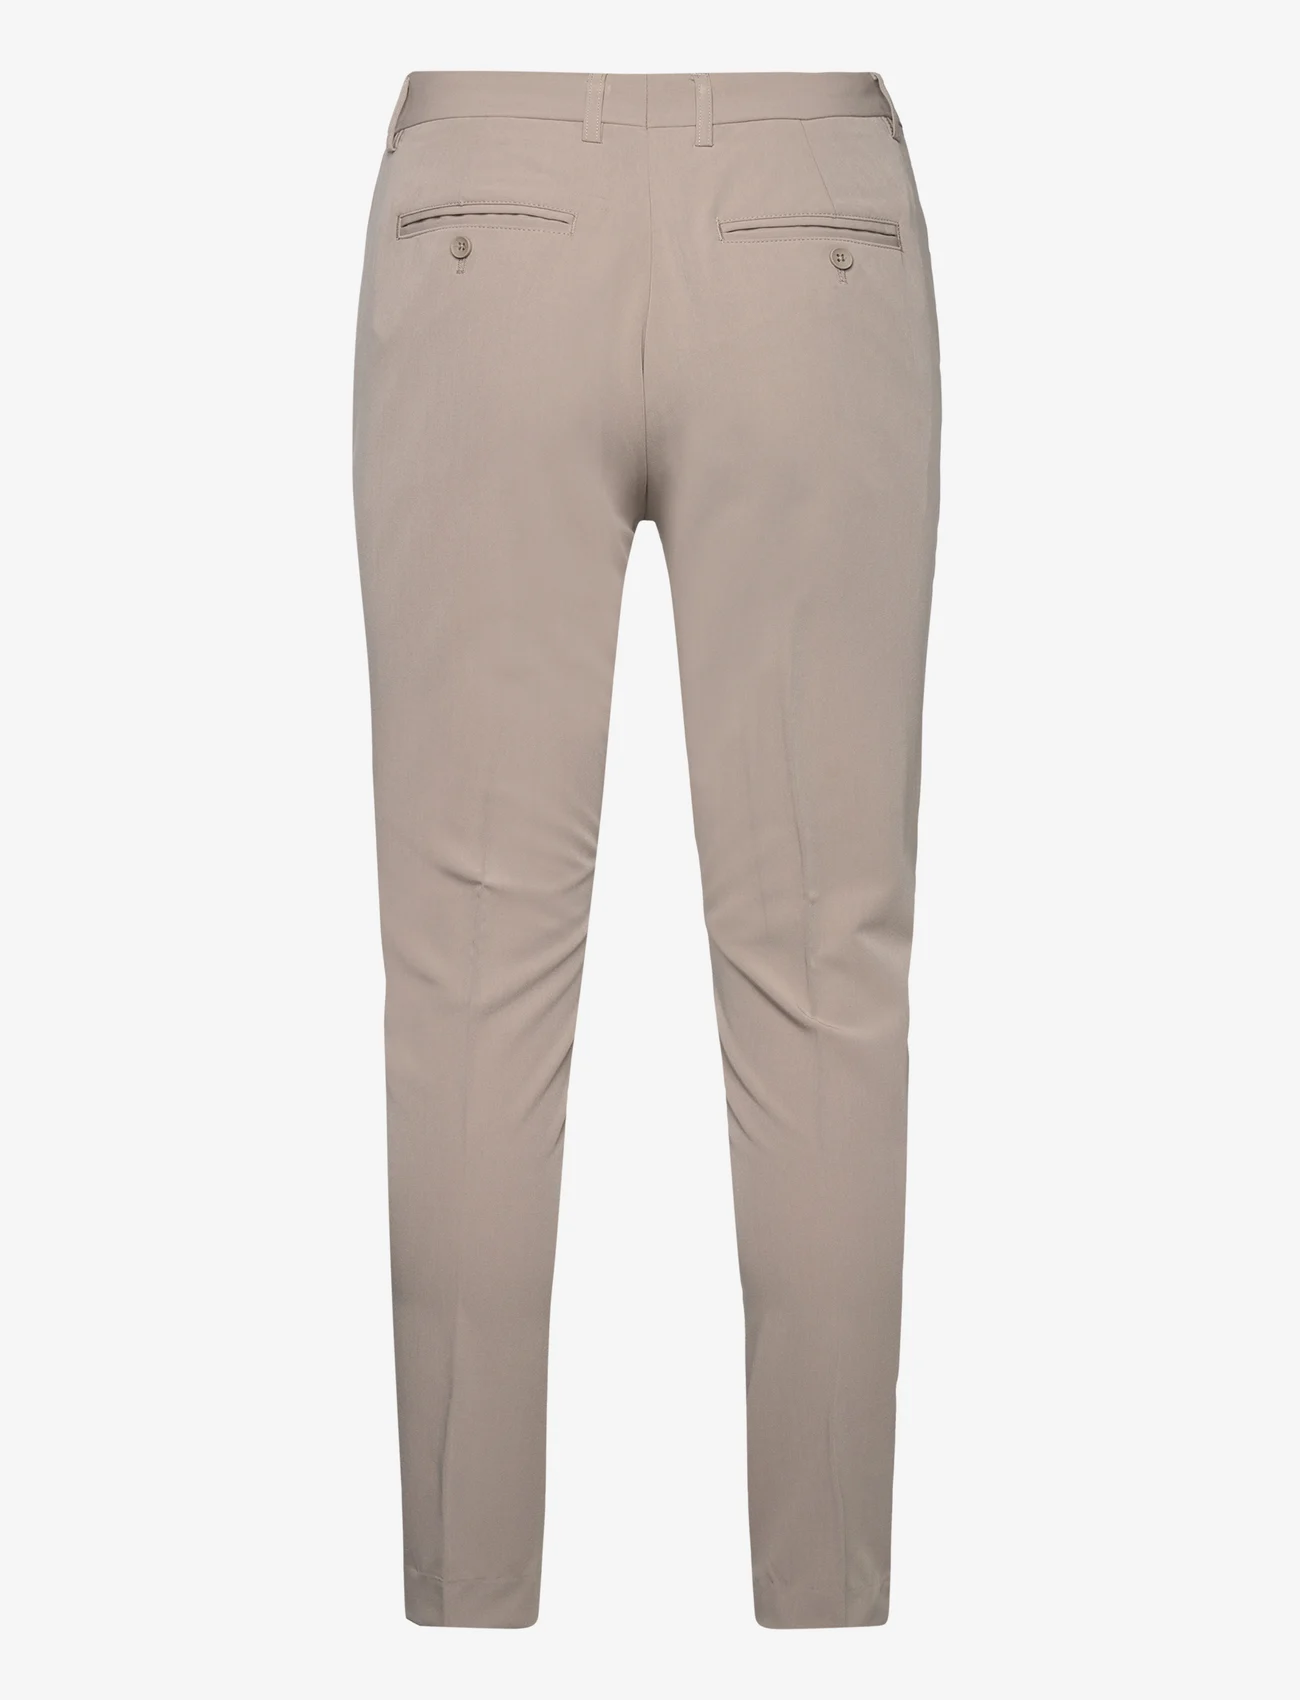 ONLY & SONS - ONSEVE SLIM 0071 PANT NOOS - suit trousers - vintage khaki - 1